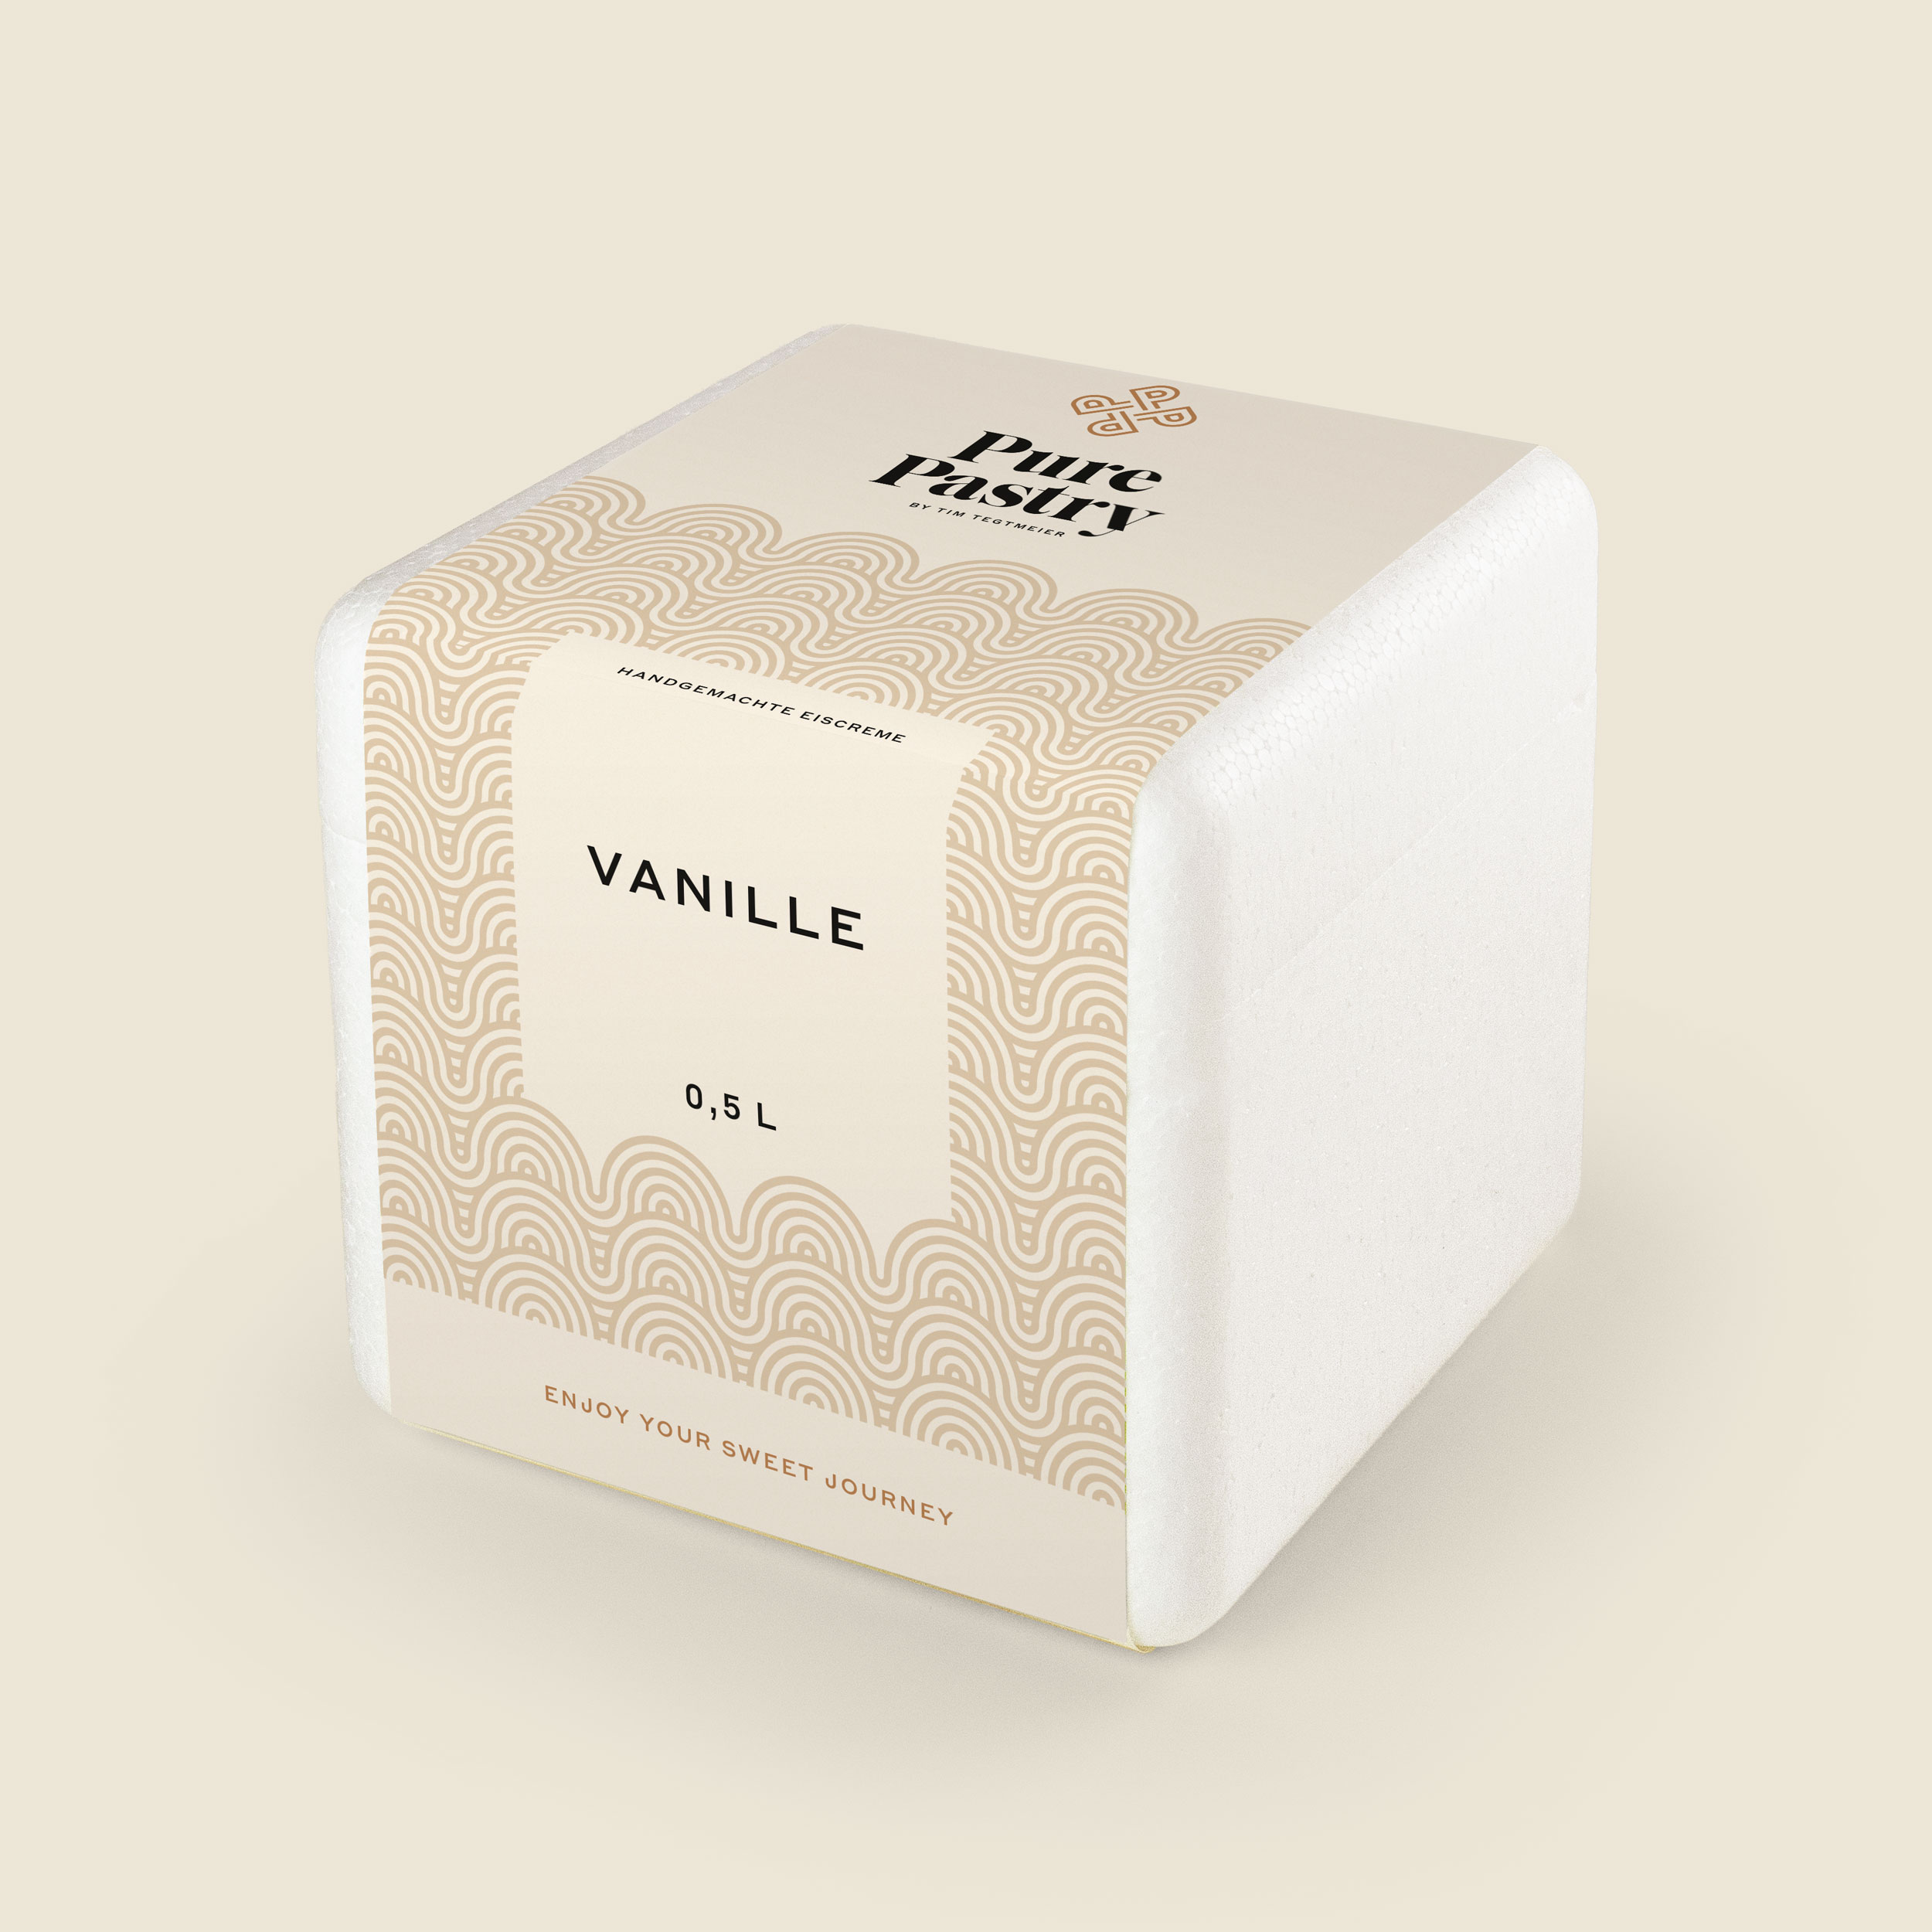 Pastry – Pure Vanille-Eis